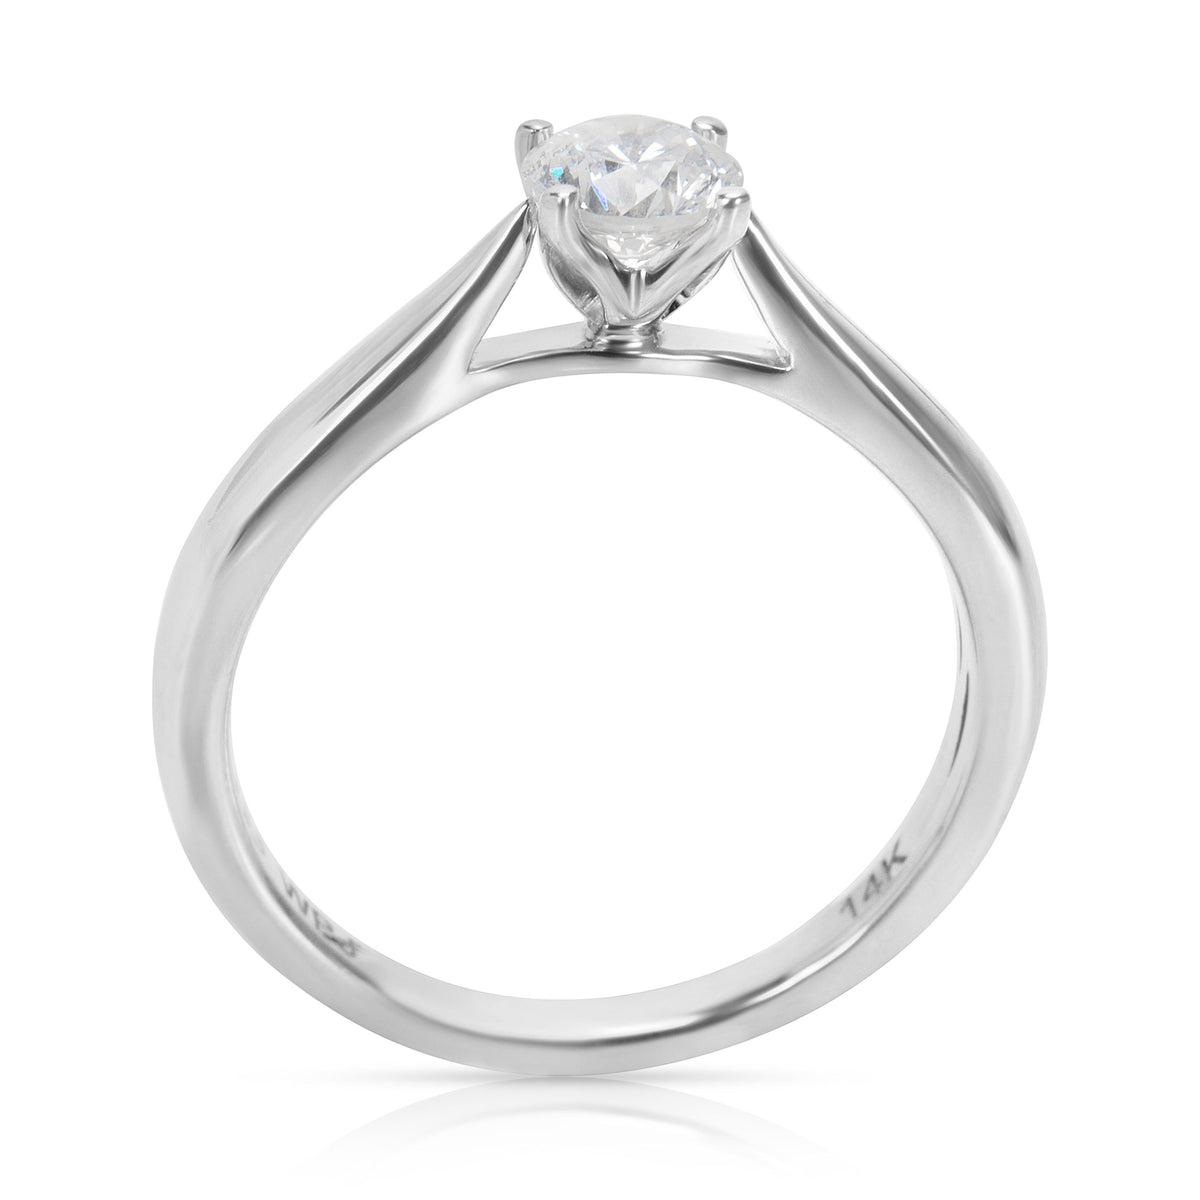 BRAND NEW Soiltaire Engagement Ring in 14K White Gold with Diamonds (0.42 CTW)